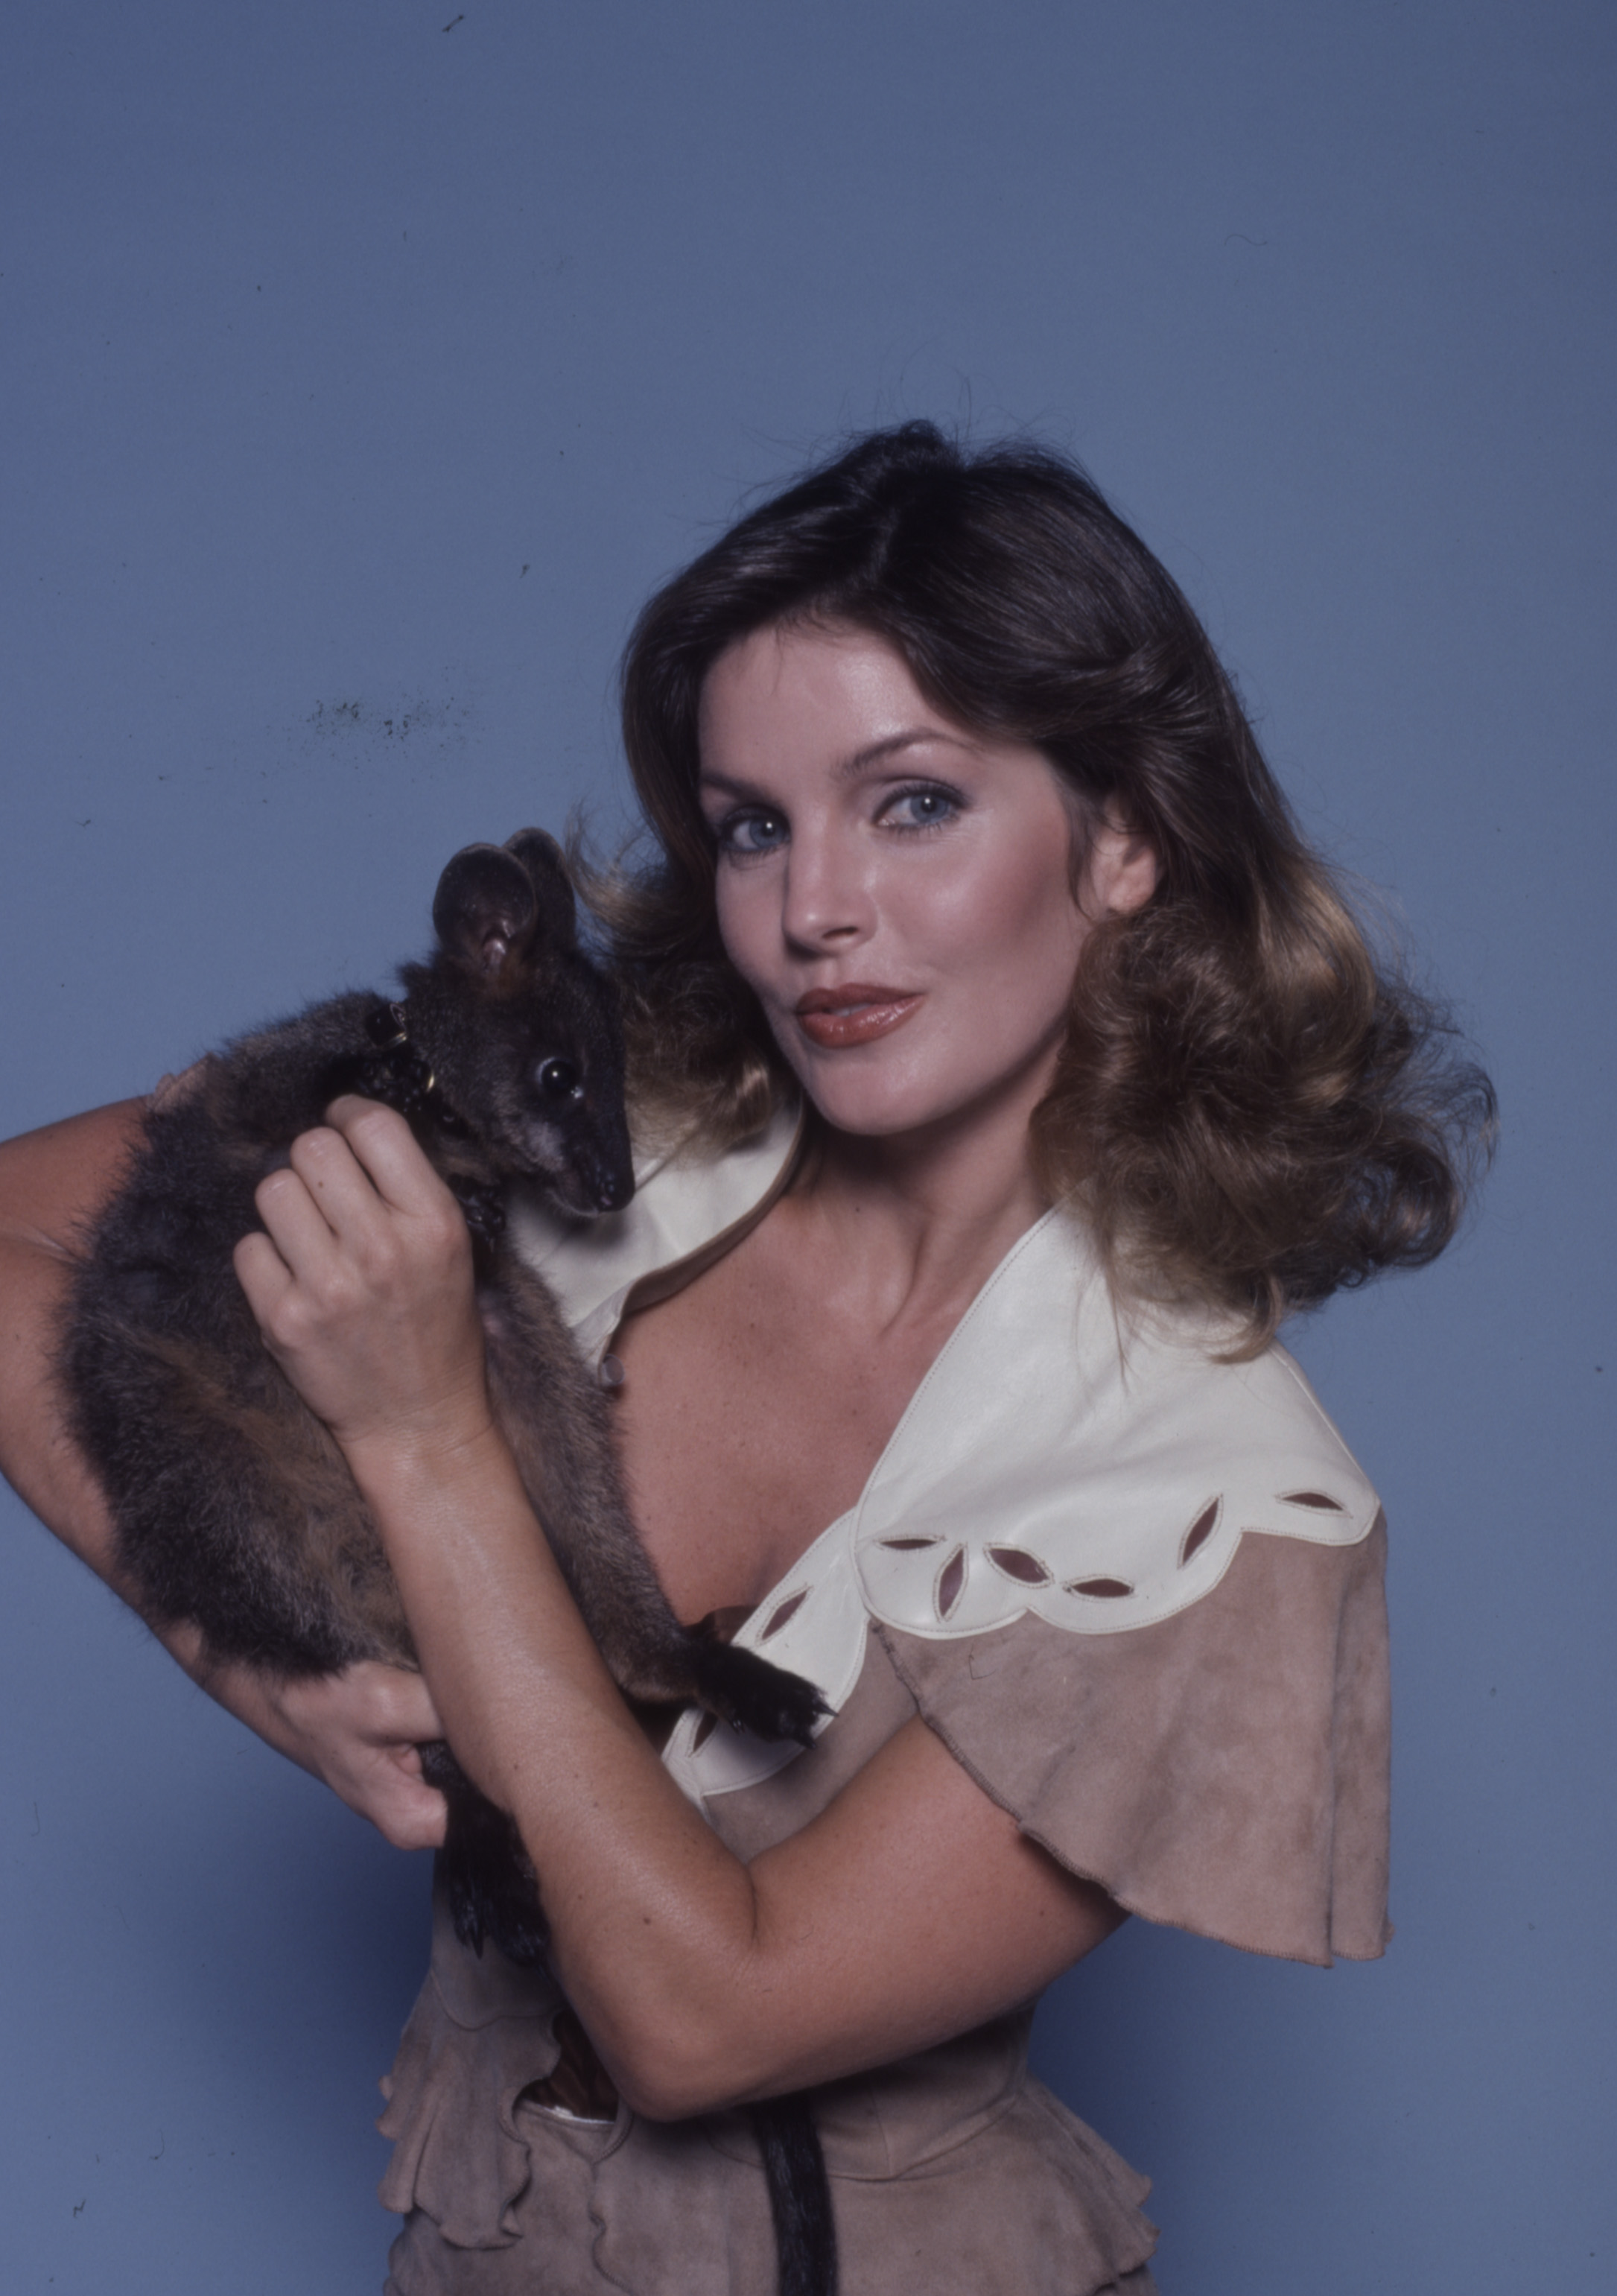 Priscilla Presley promotional photo for the ABC tv series "Those Amazing Animals" in Los Angeles, California, in 1980. | Source: Getty Images